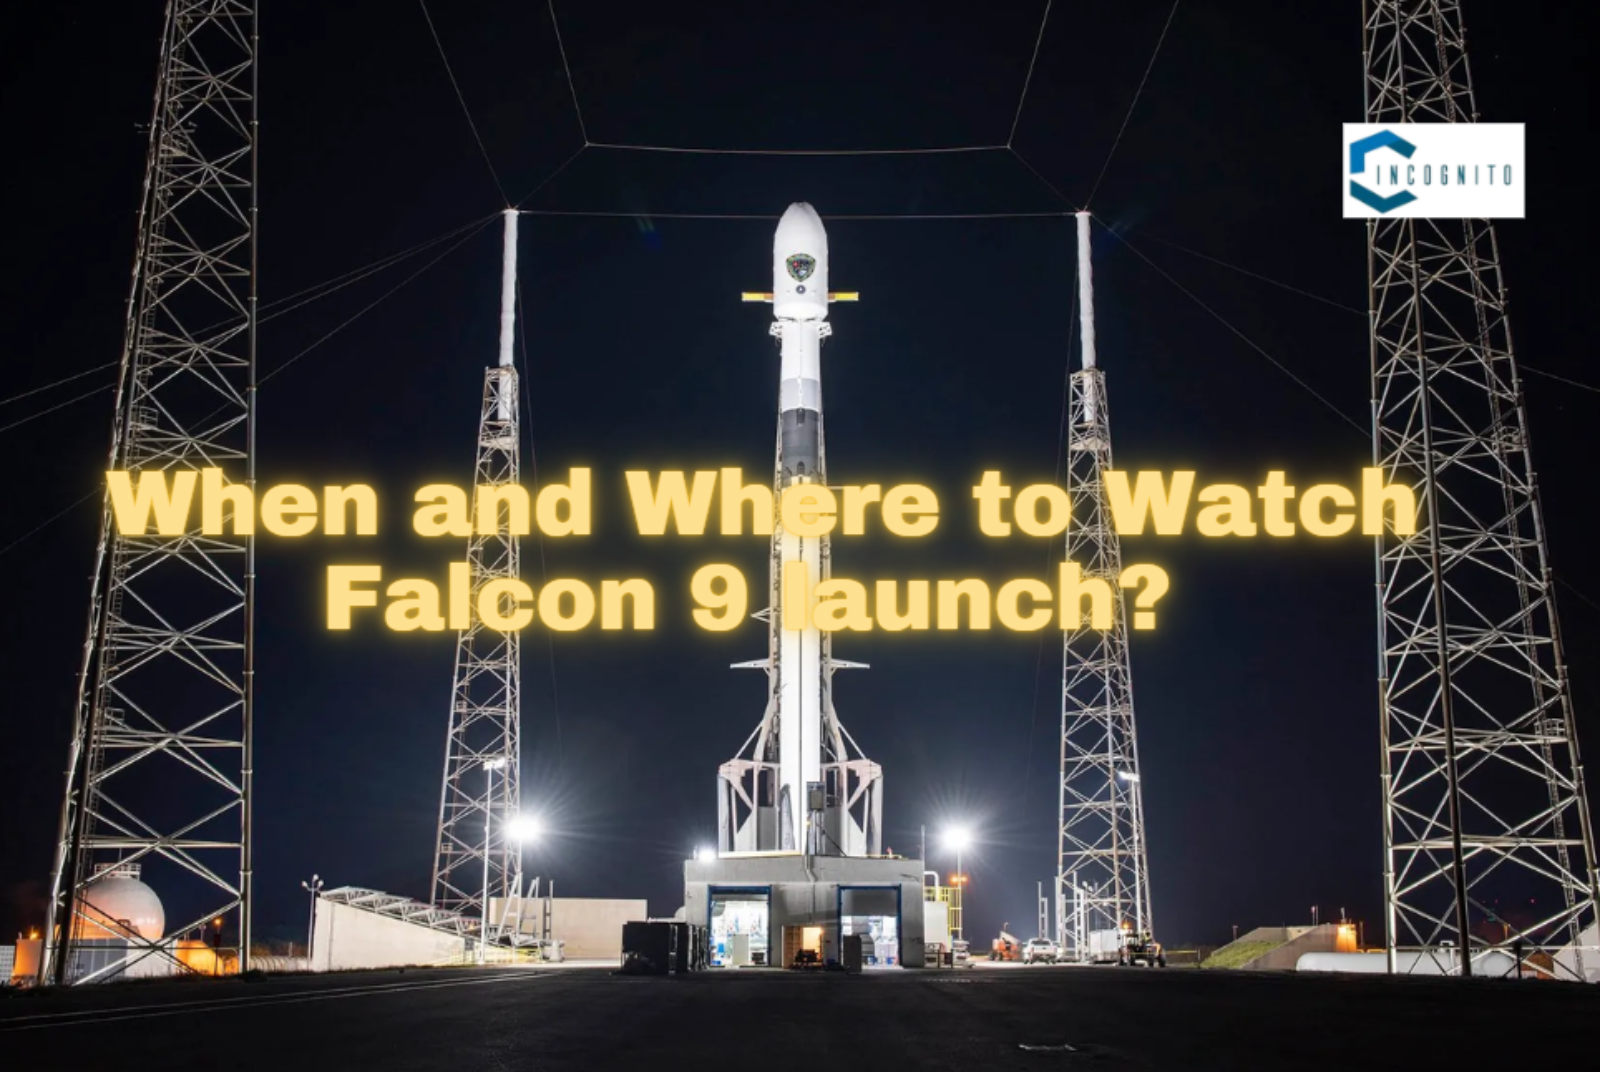 When and Where to Watch Falcon 9 launch?